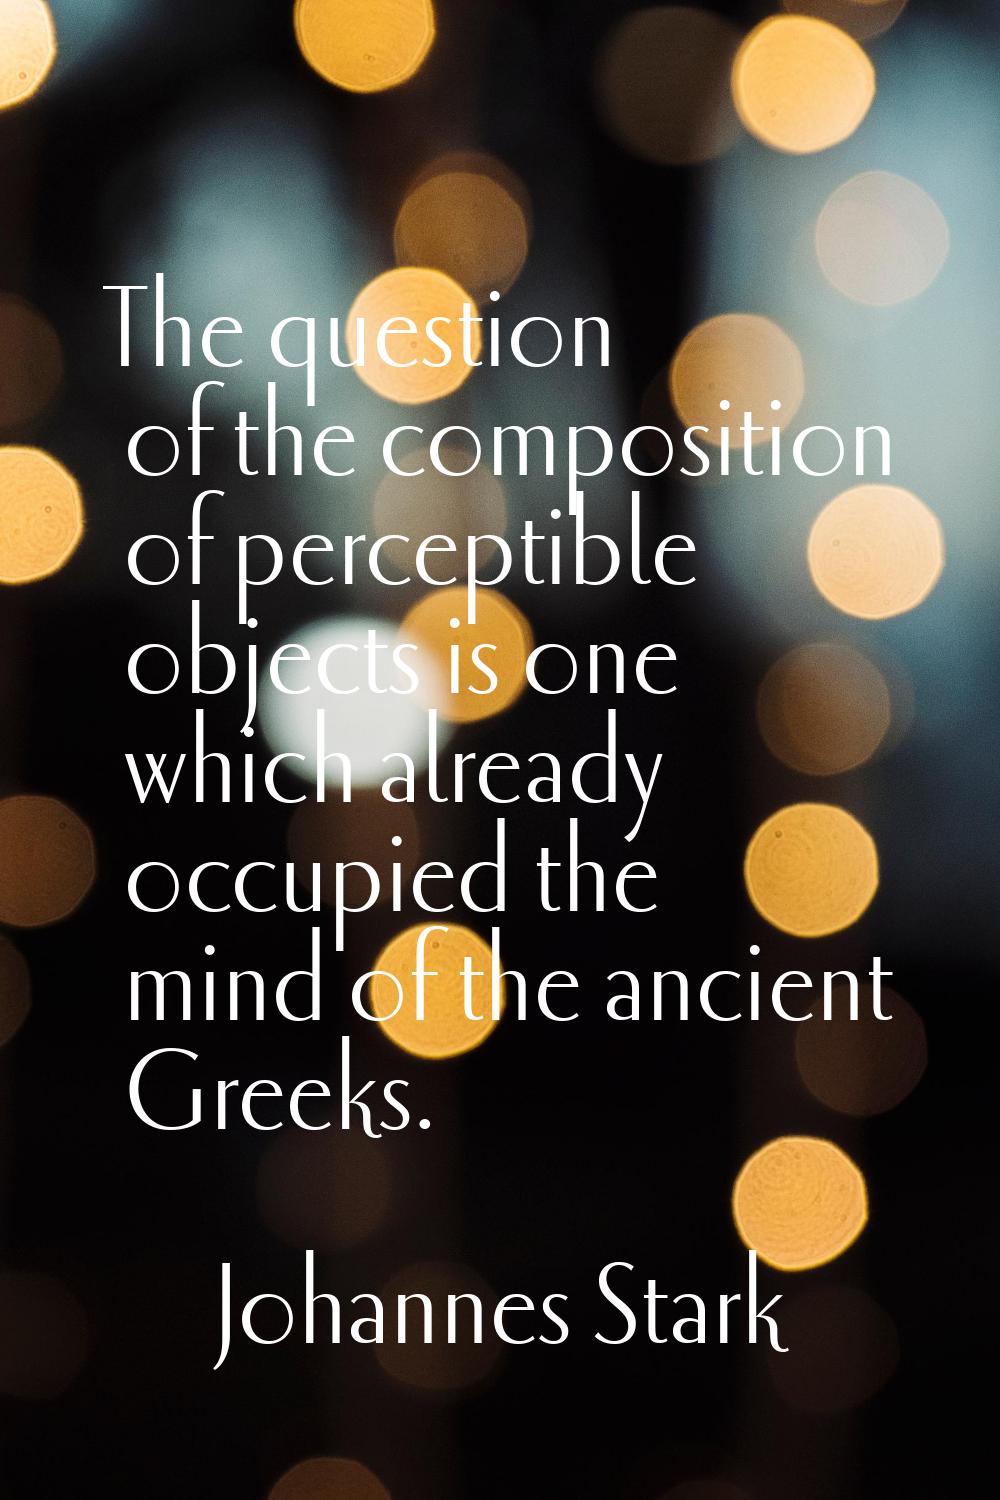 The question of the composition of perceptible objects is one which already occupied the mind of th